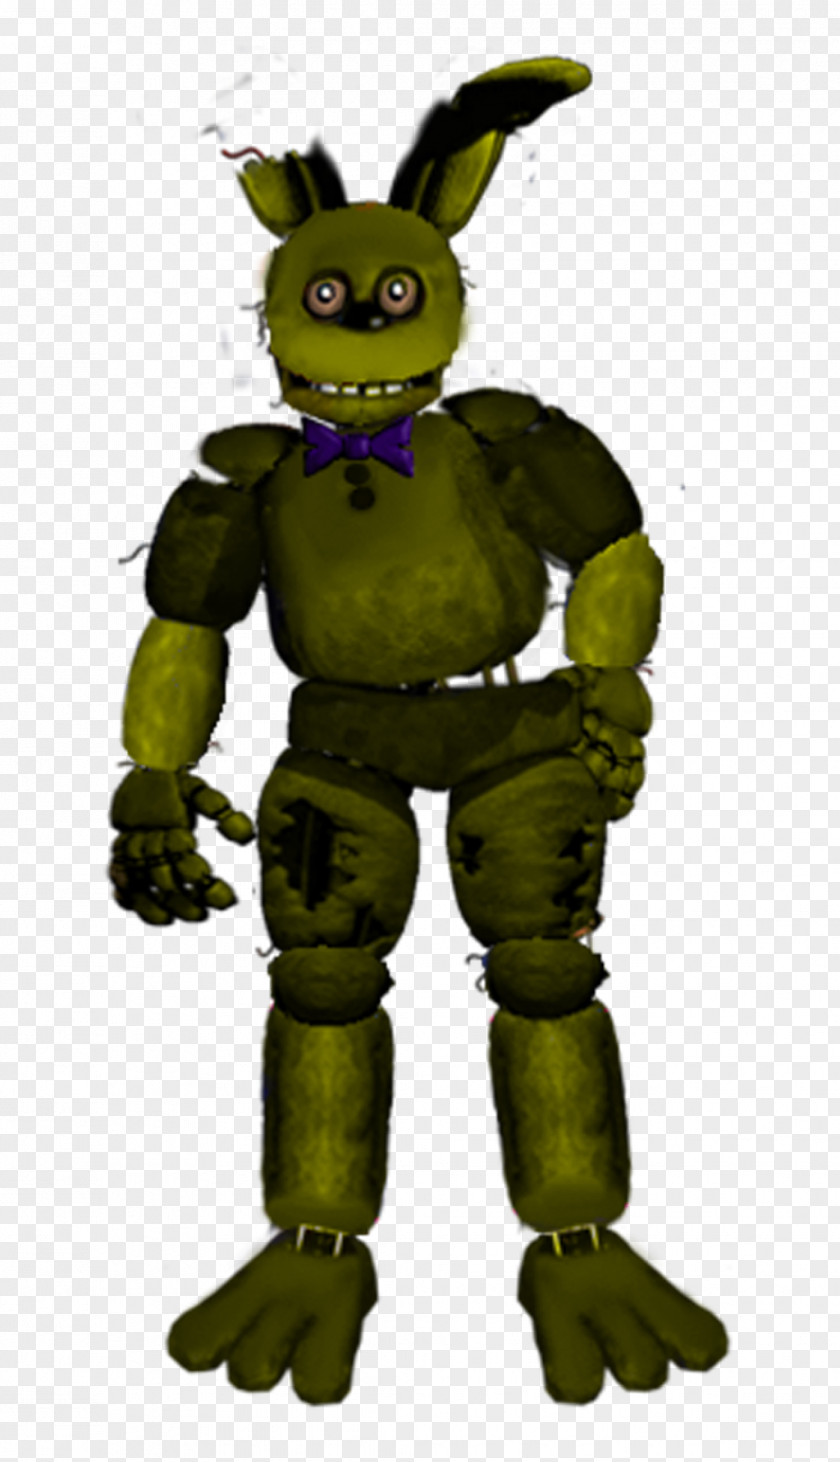 Five Nights At Freddy's 3 2 4 Survival Logbook Animatronics PNG